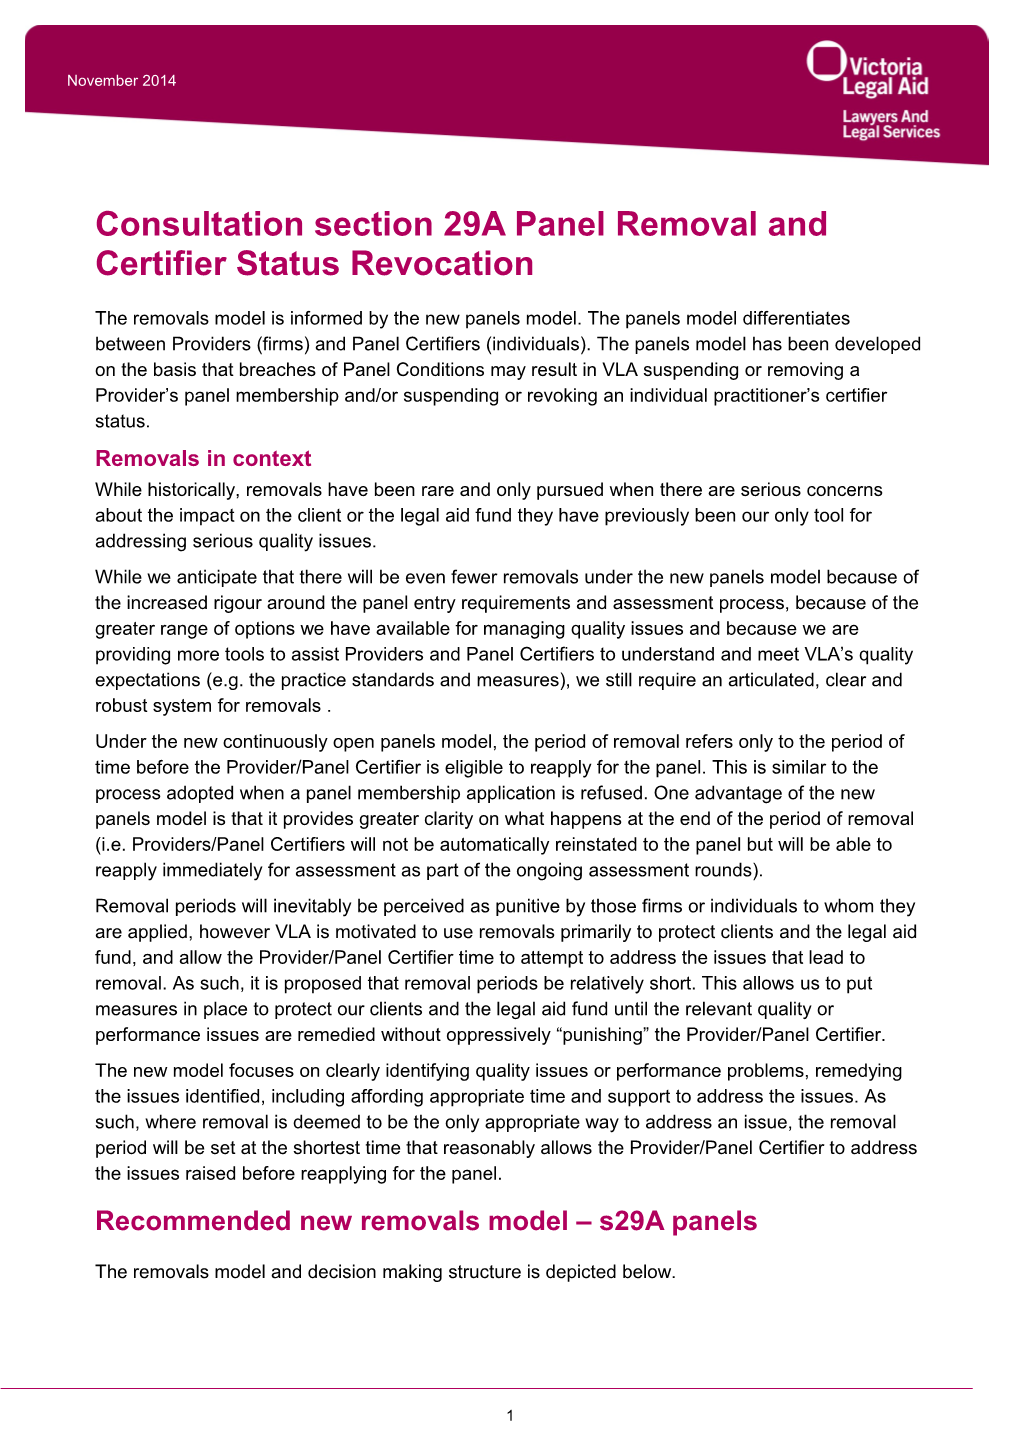 Consultation Section 29A Panel Removal and Certifier Status Revocation